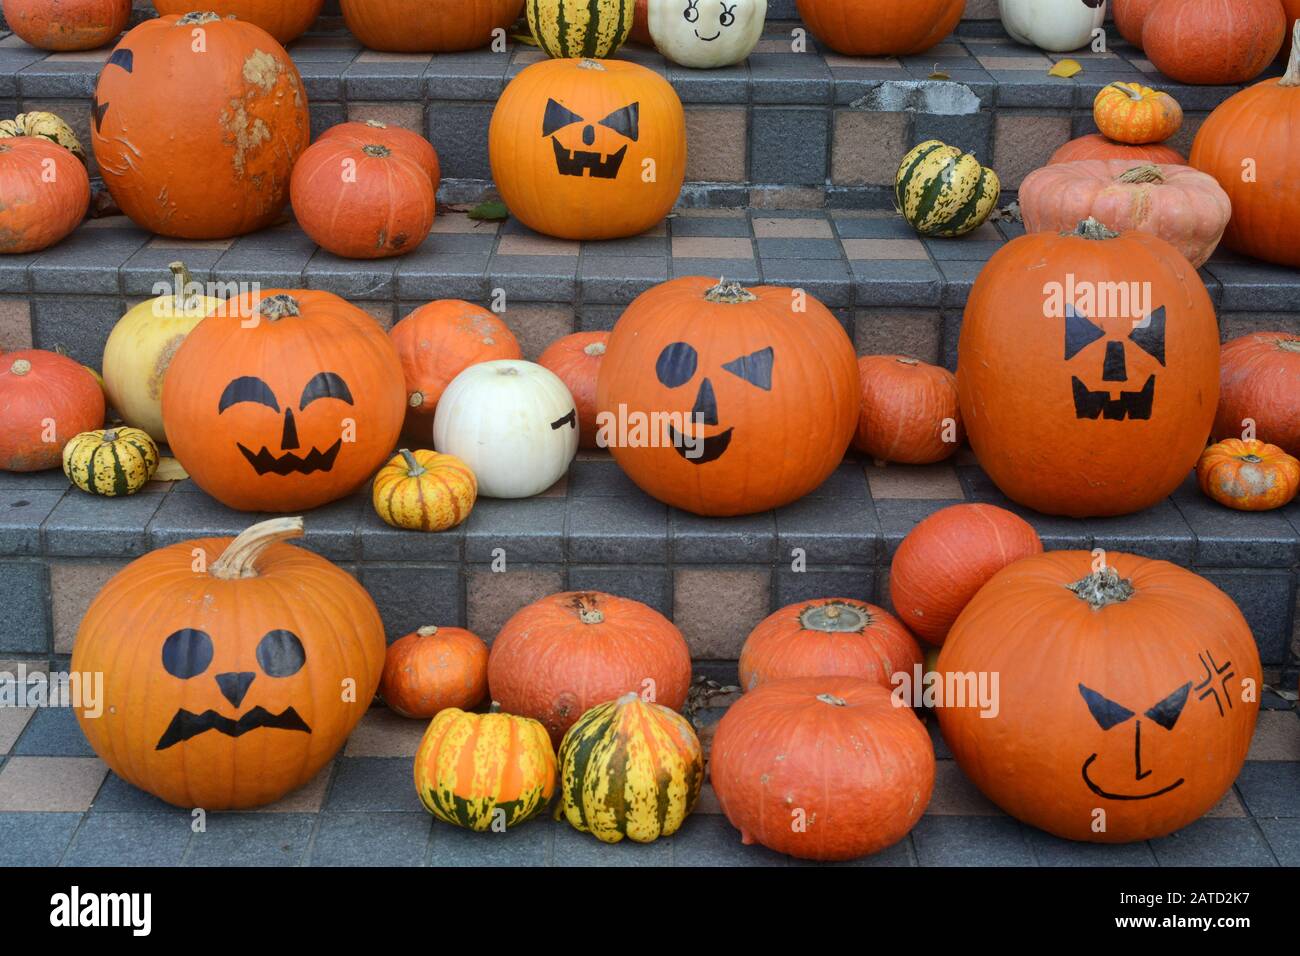 Halloween jack-o'-lantern pumpkins with a range of funny and spooky faces Stock Photo